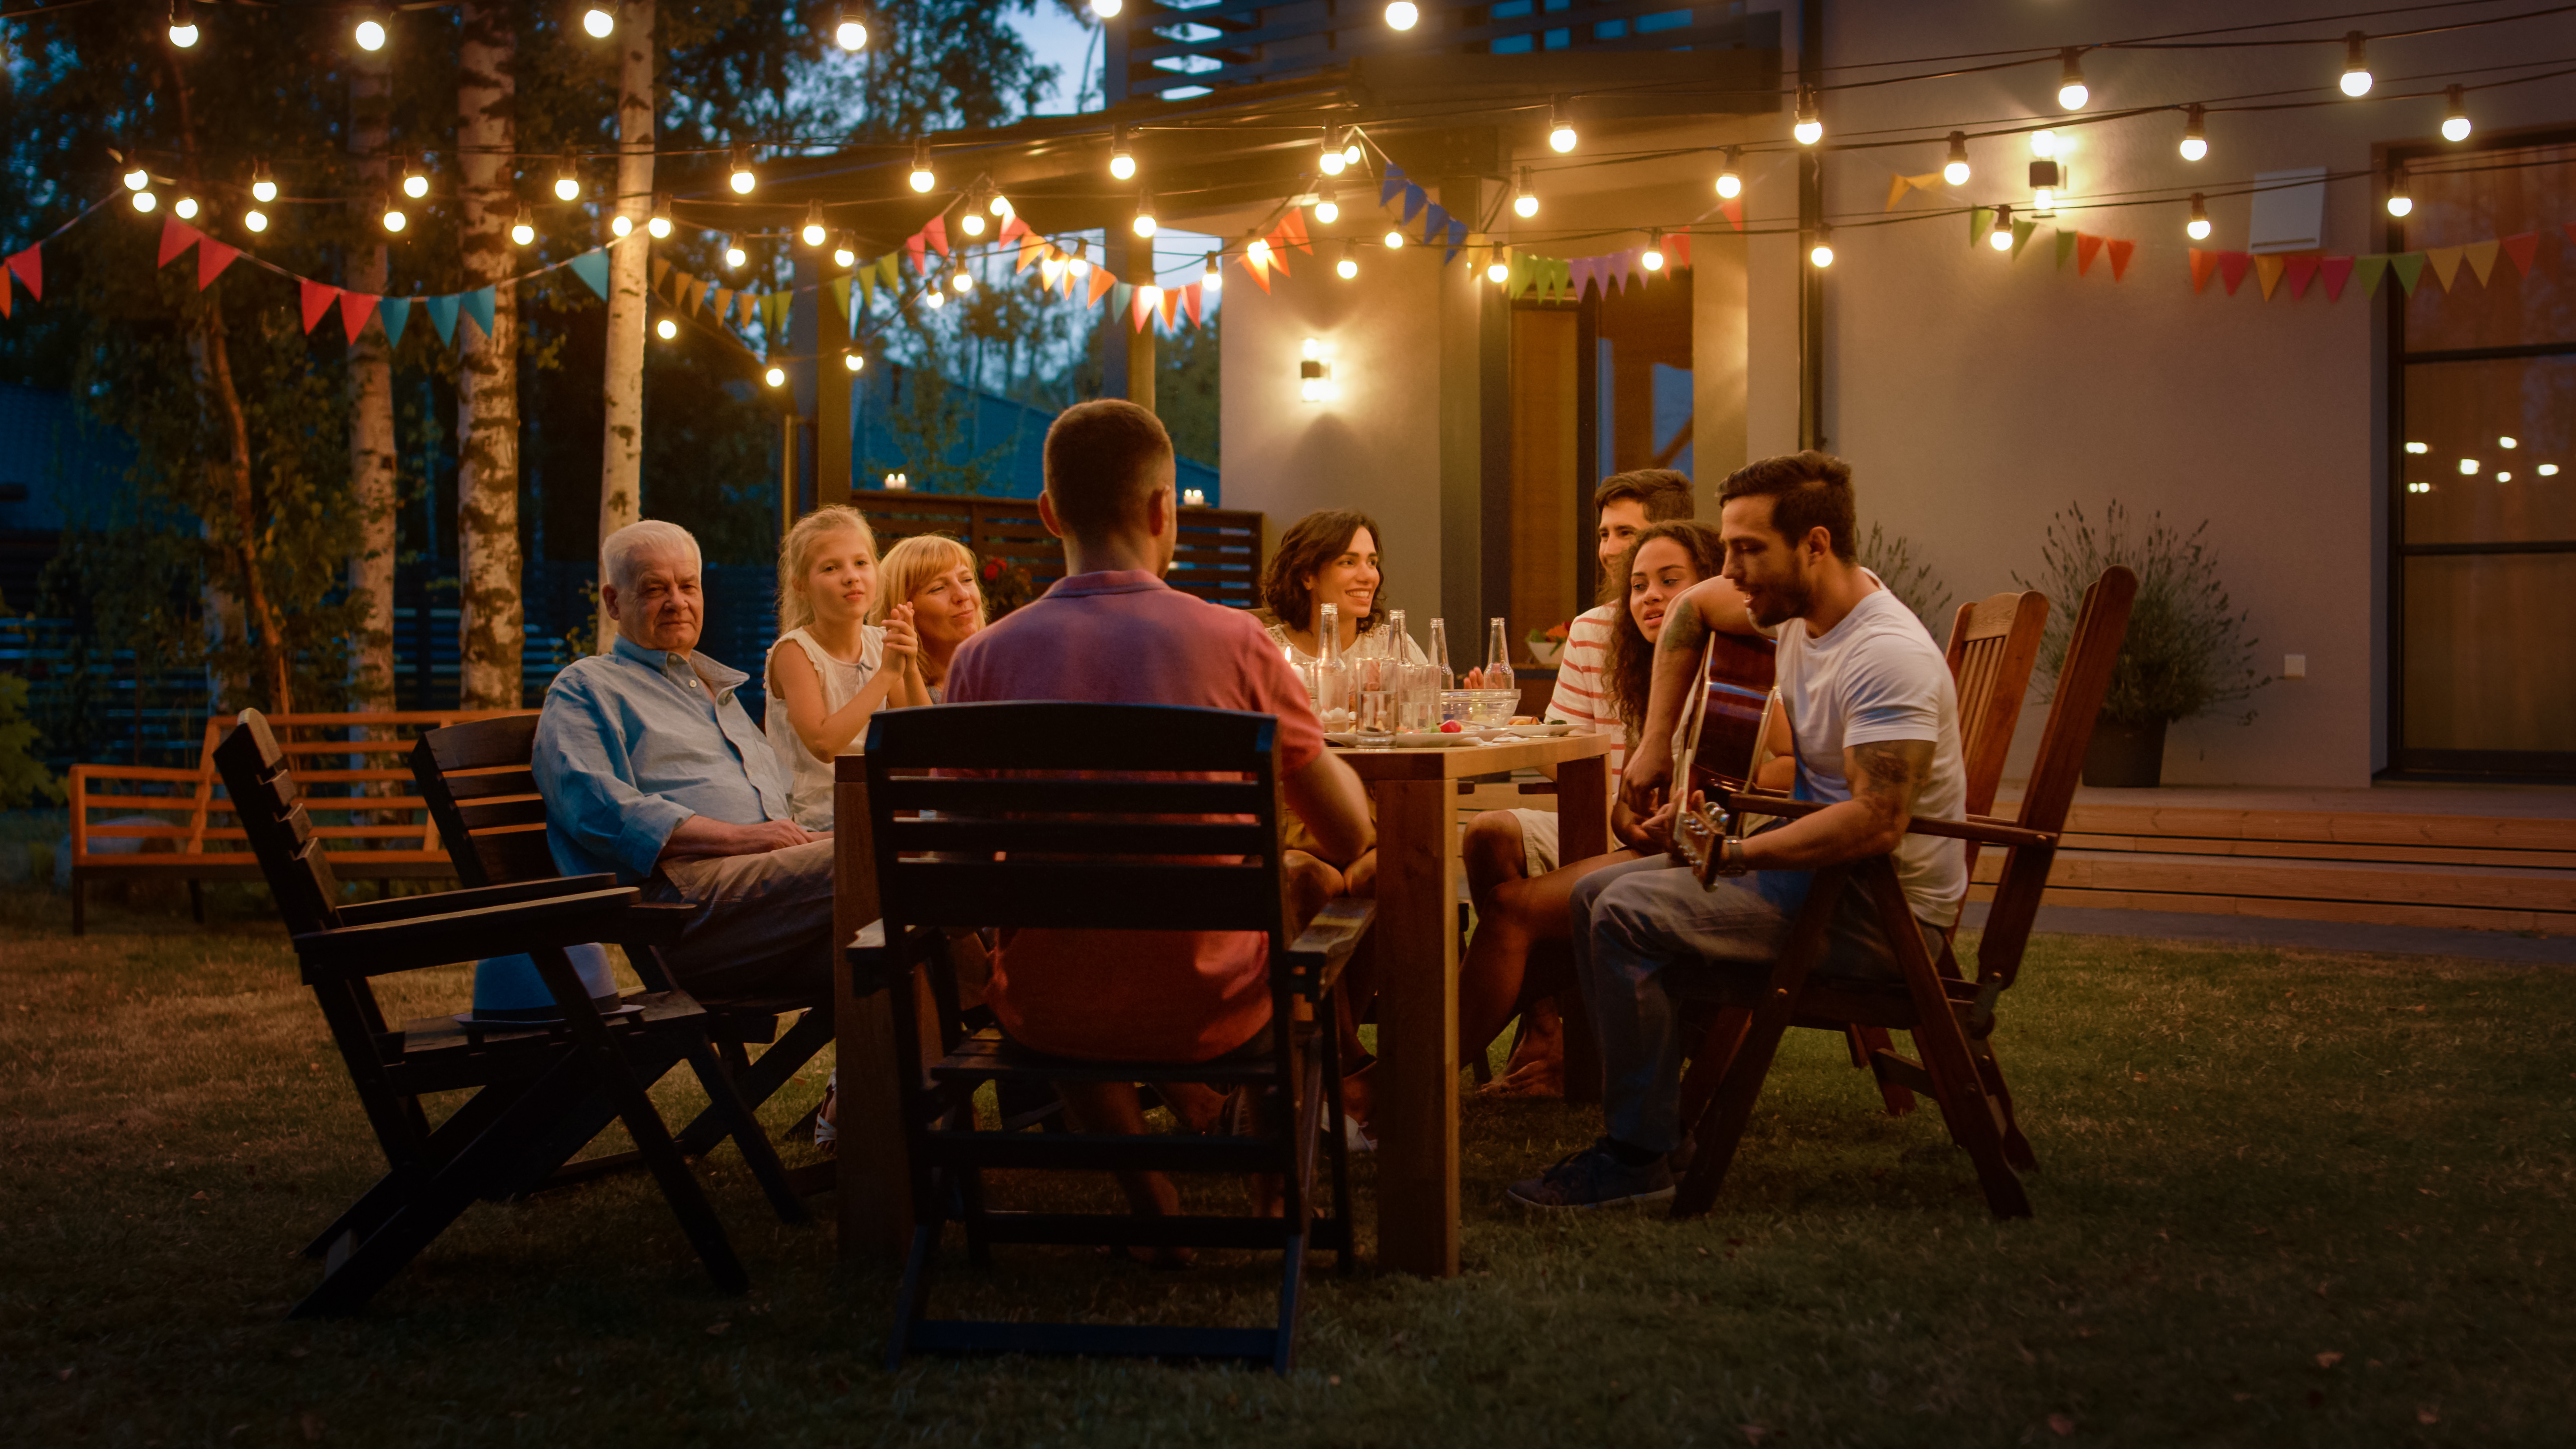 A family eating dinner outdoors | Source: Shutterstock